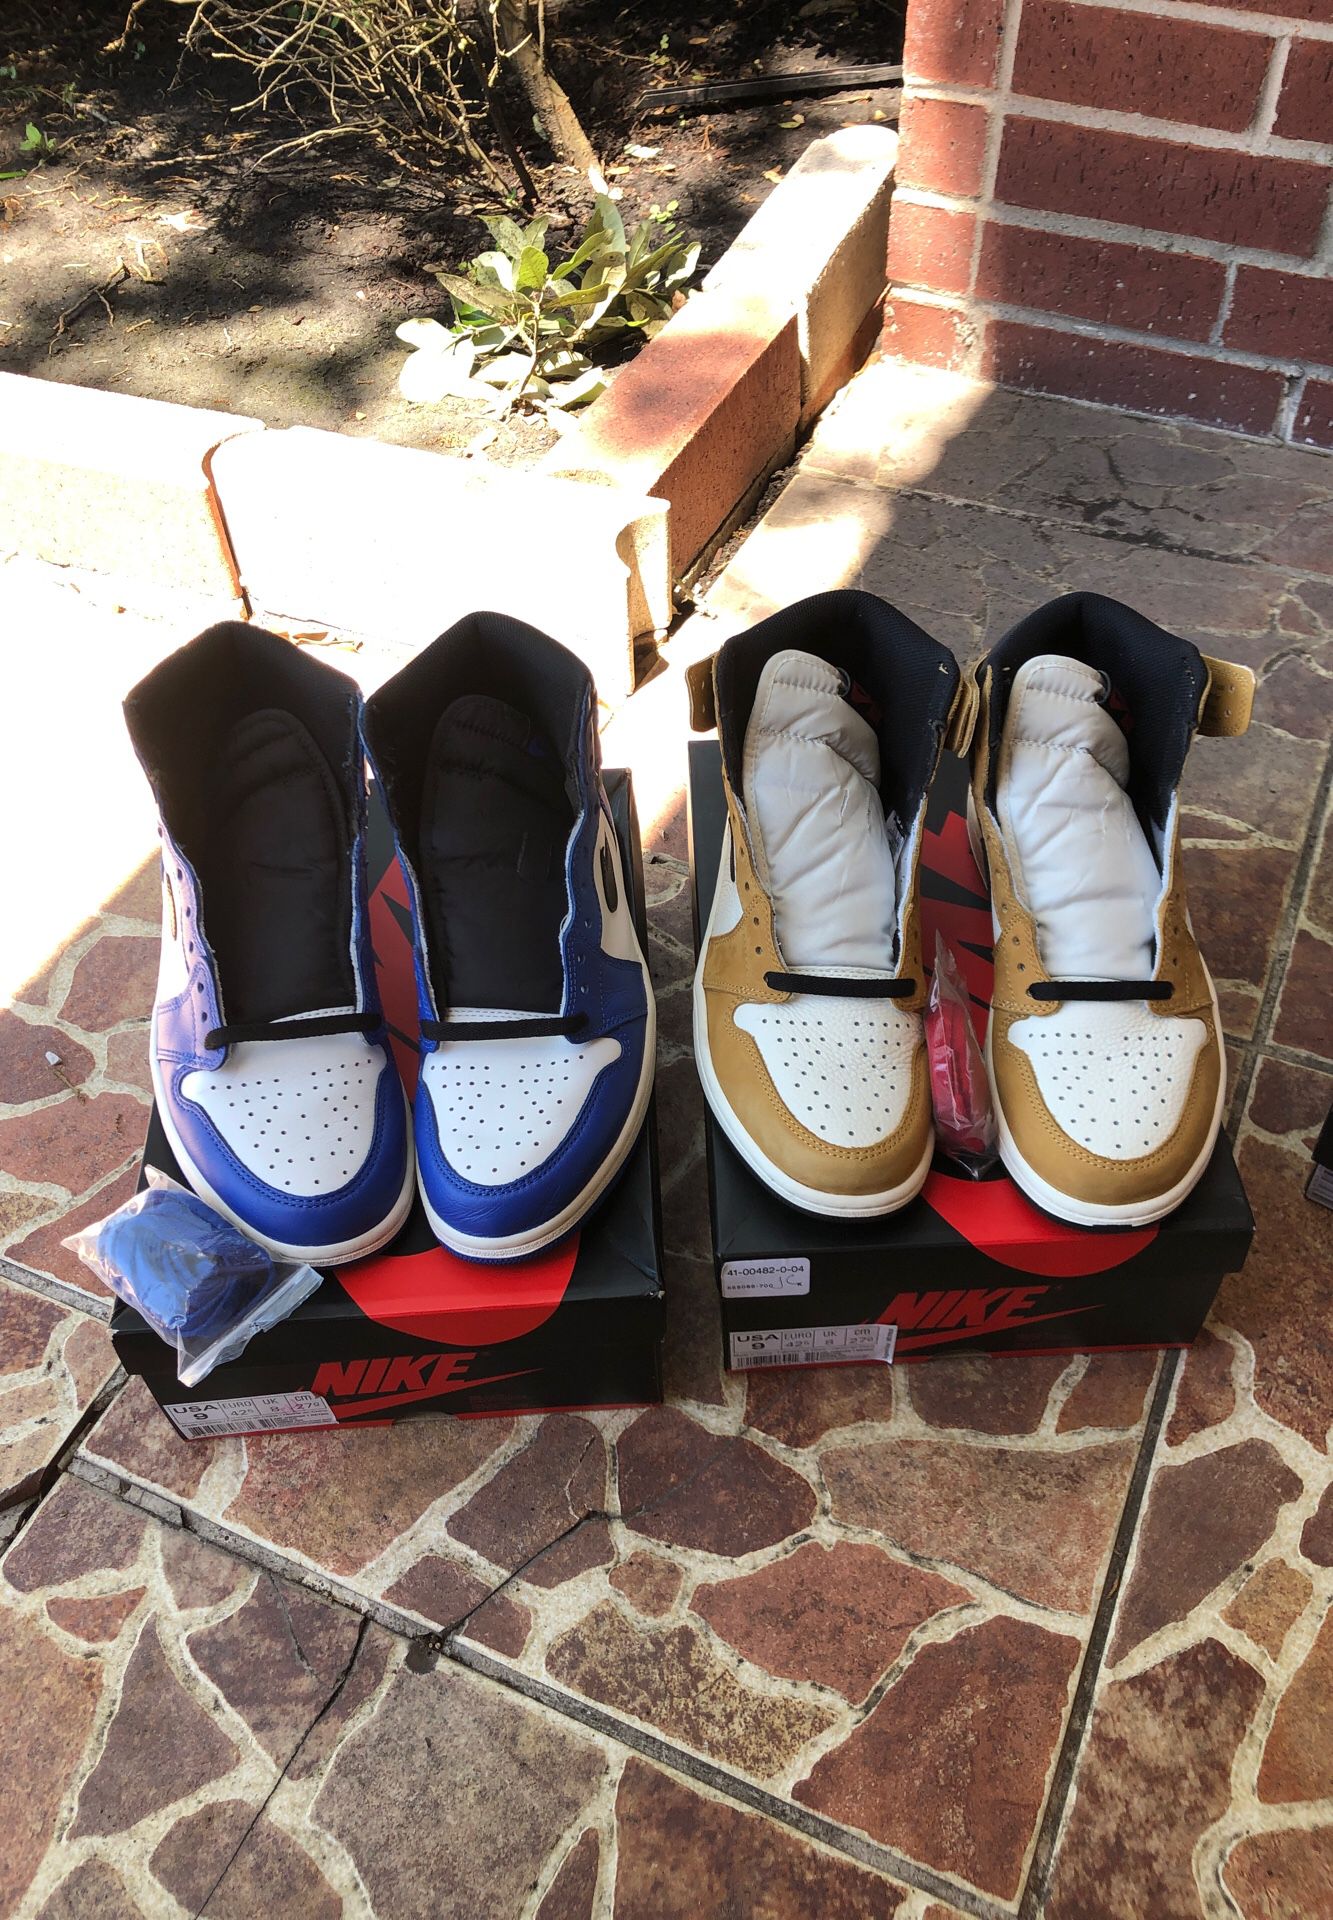 Air jordan 1 “rookie of the year” and “game royal” size 9